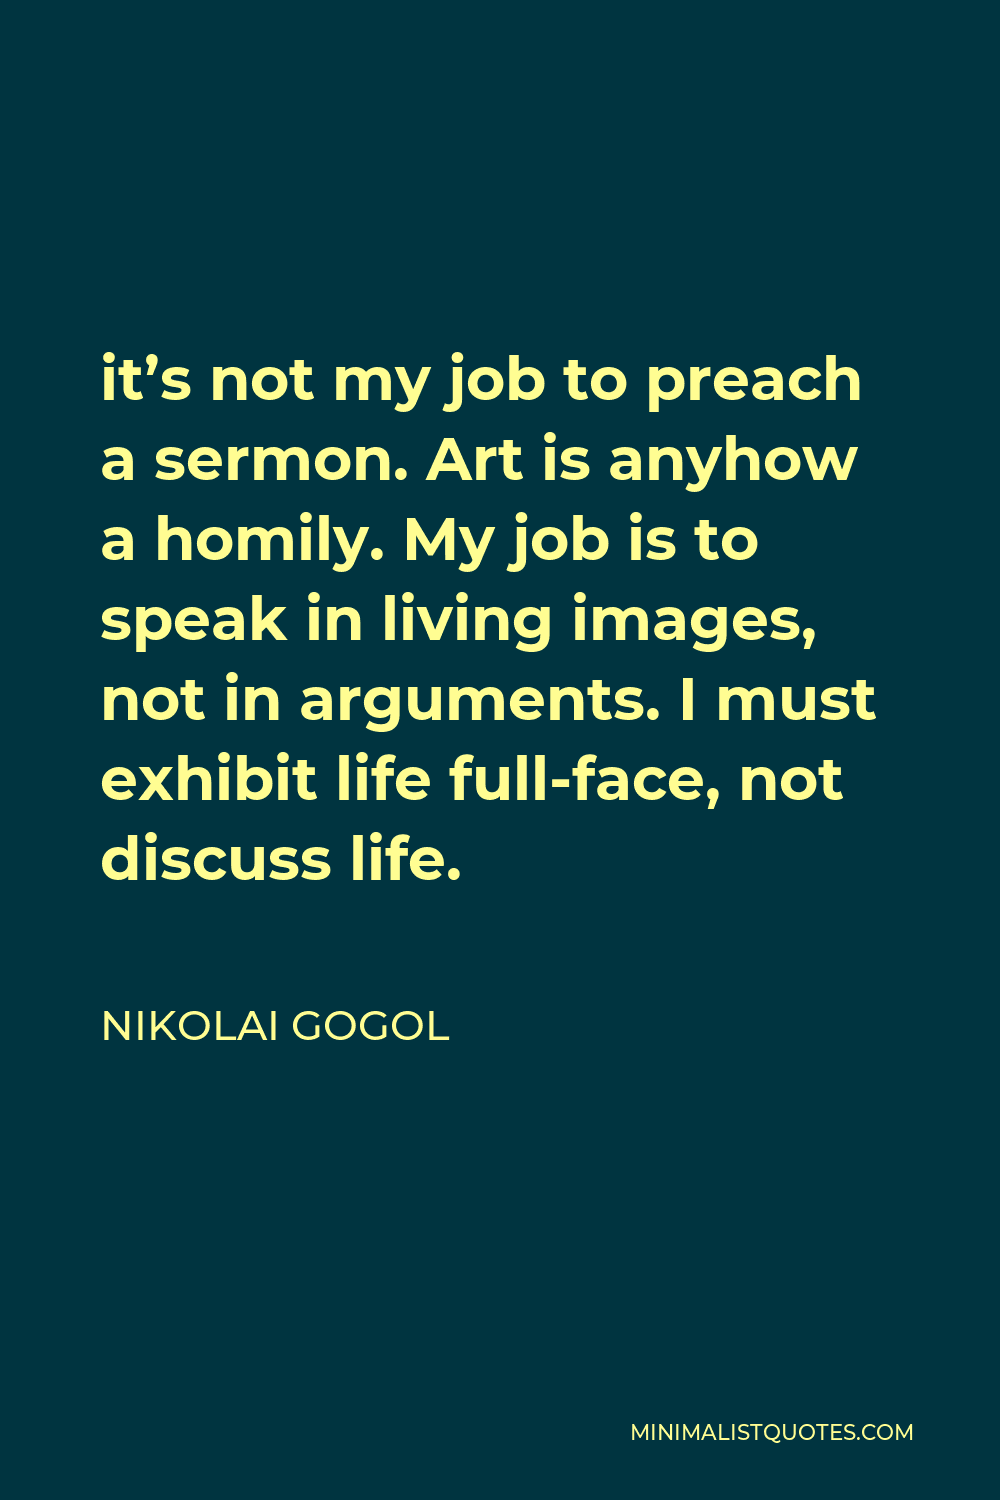 Nikolai Gogol Quote - it’s not my job to preach a sermon. Art is anyhow a homily. My job is to speak in living images, not in arguments. I must exhibit life full-face, not discuss life.